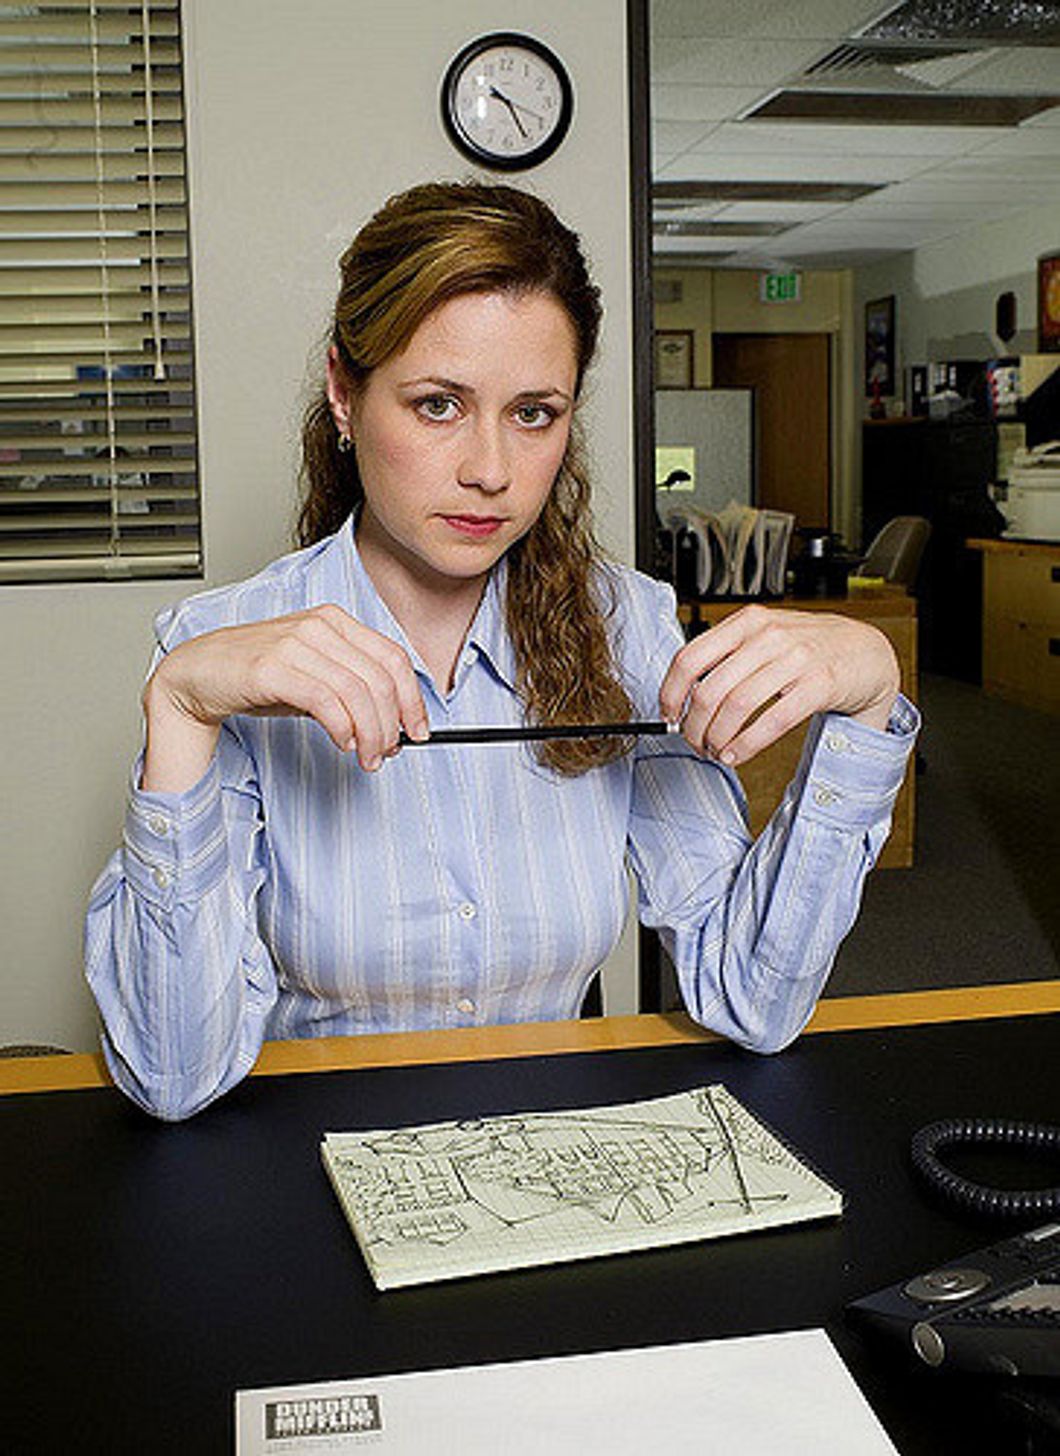 It's Impossible to Hate Pam Beesly, The True Saint Of 'The Office'